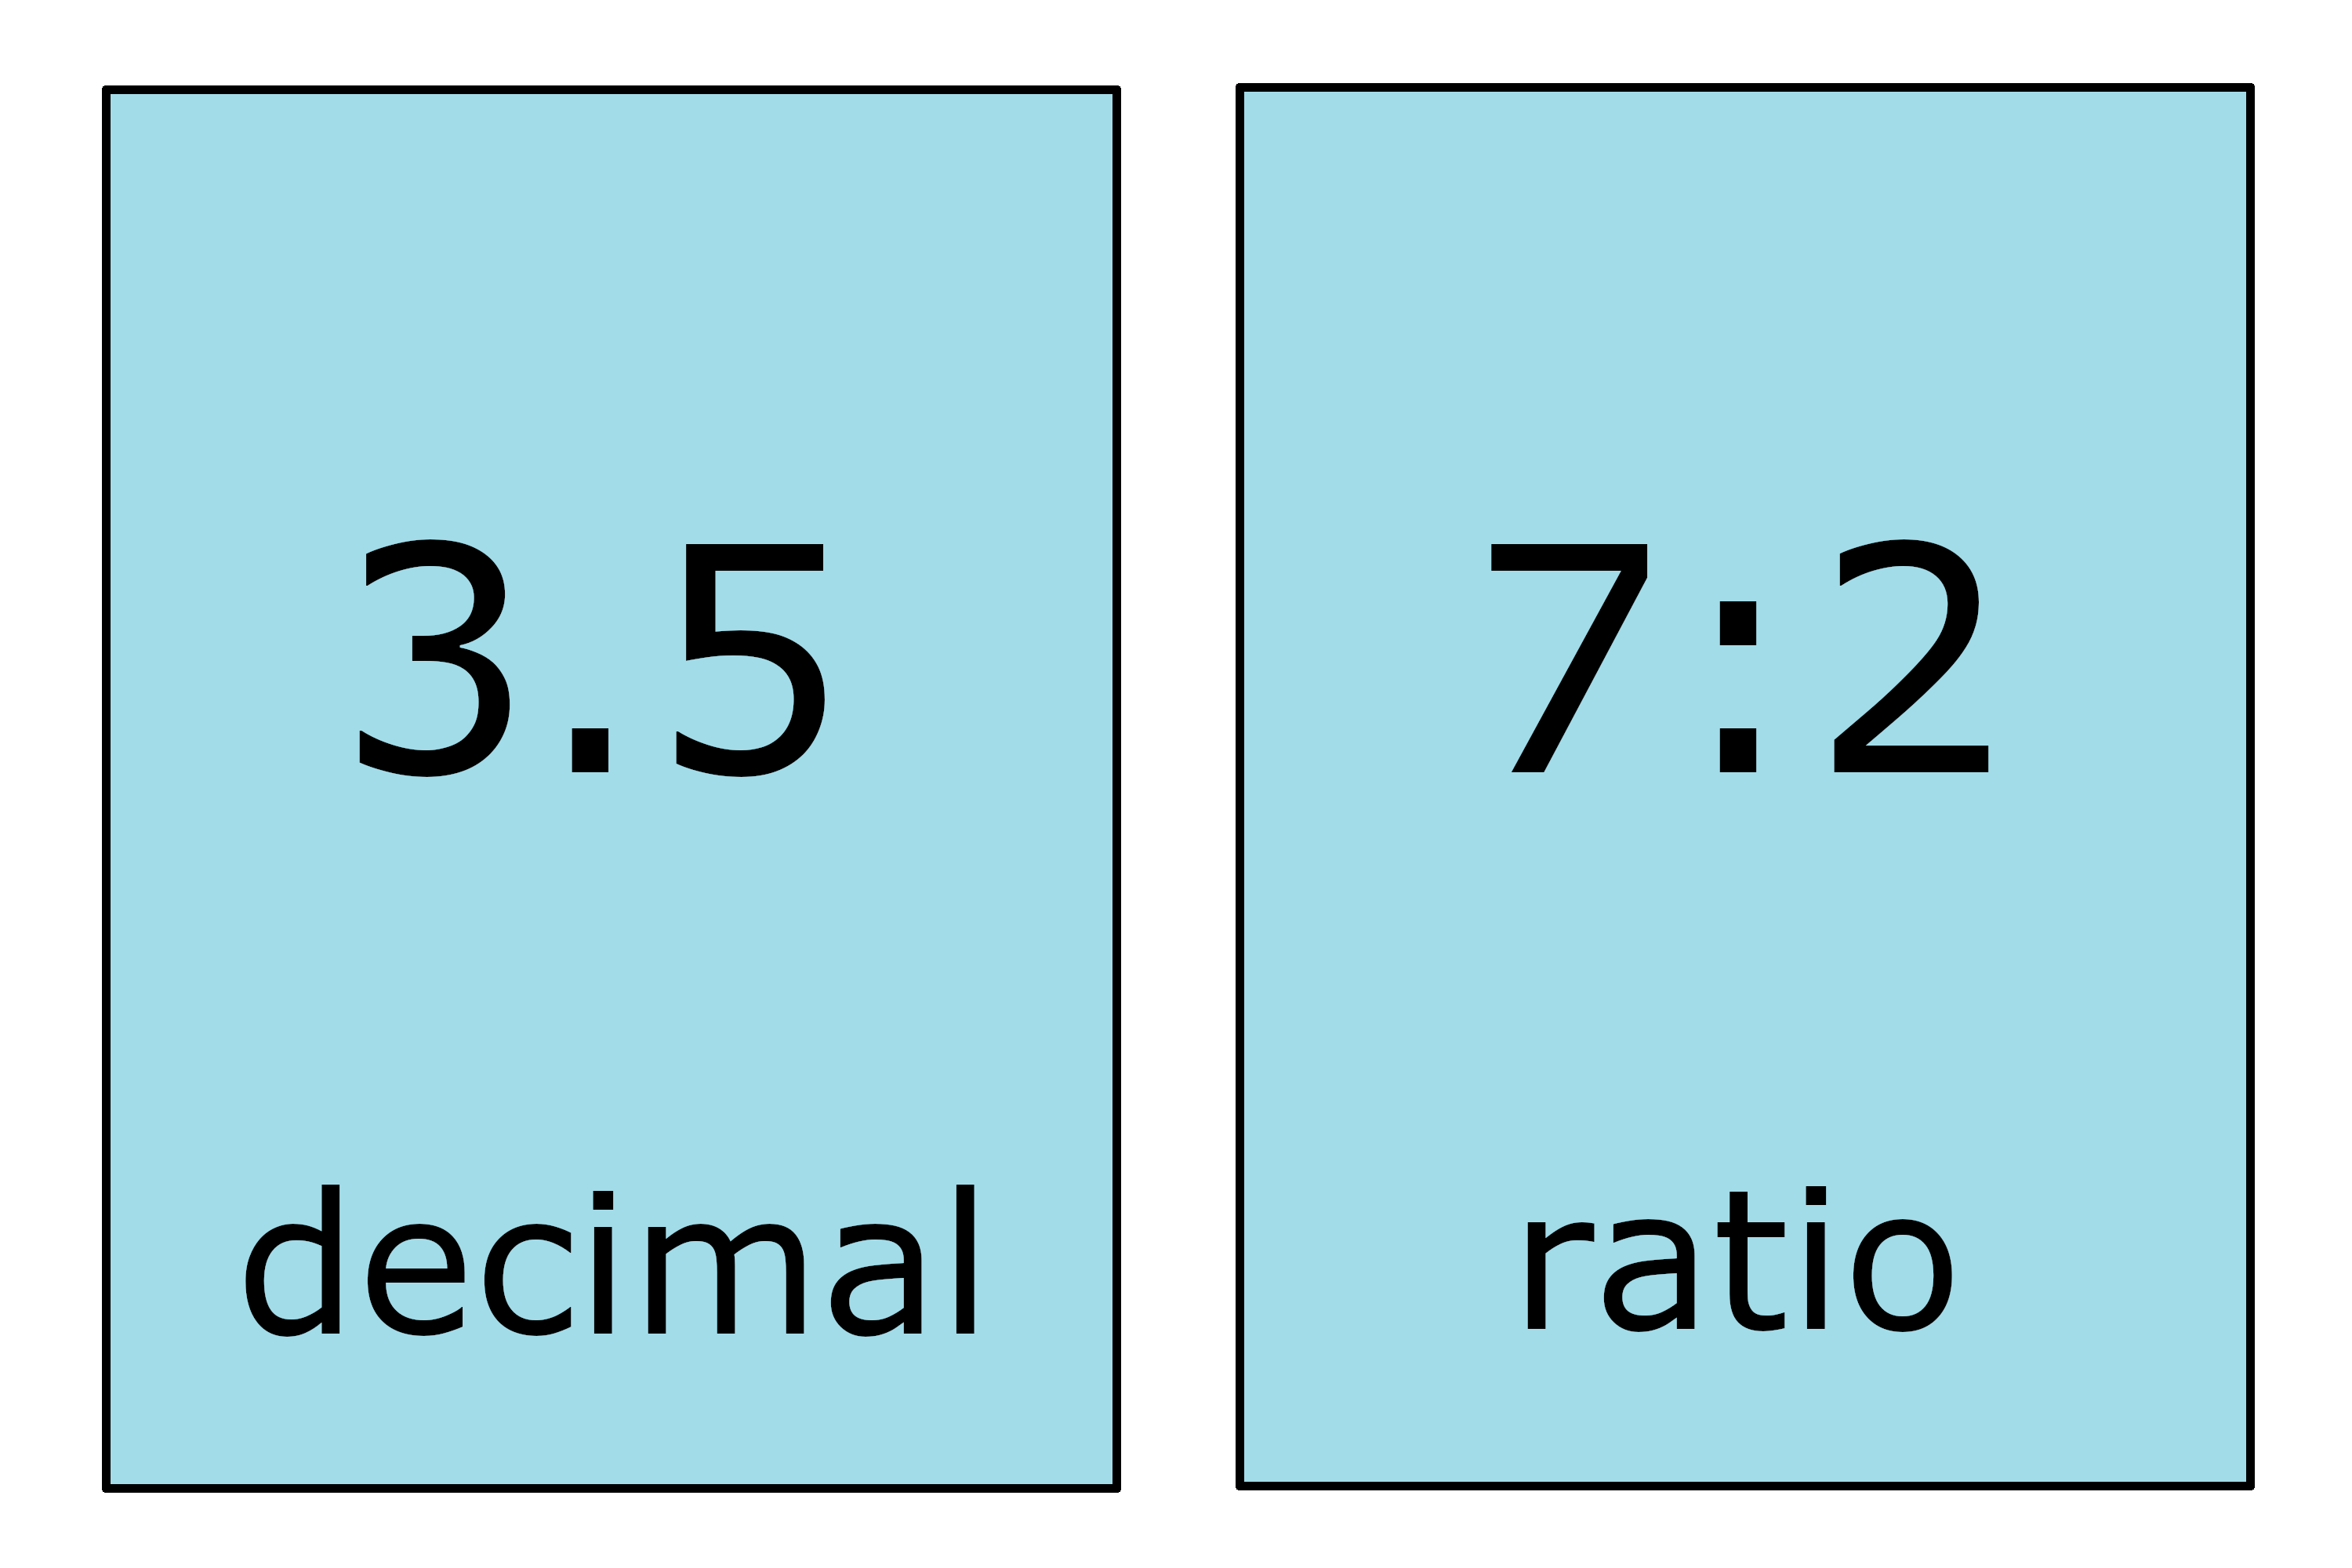 image showing the decimal 3.5 converted to the ratio 7:2